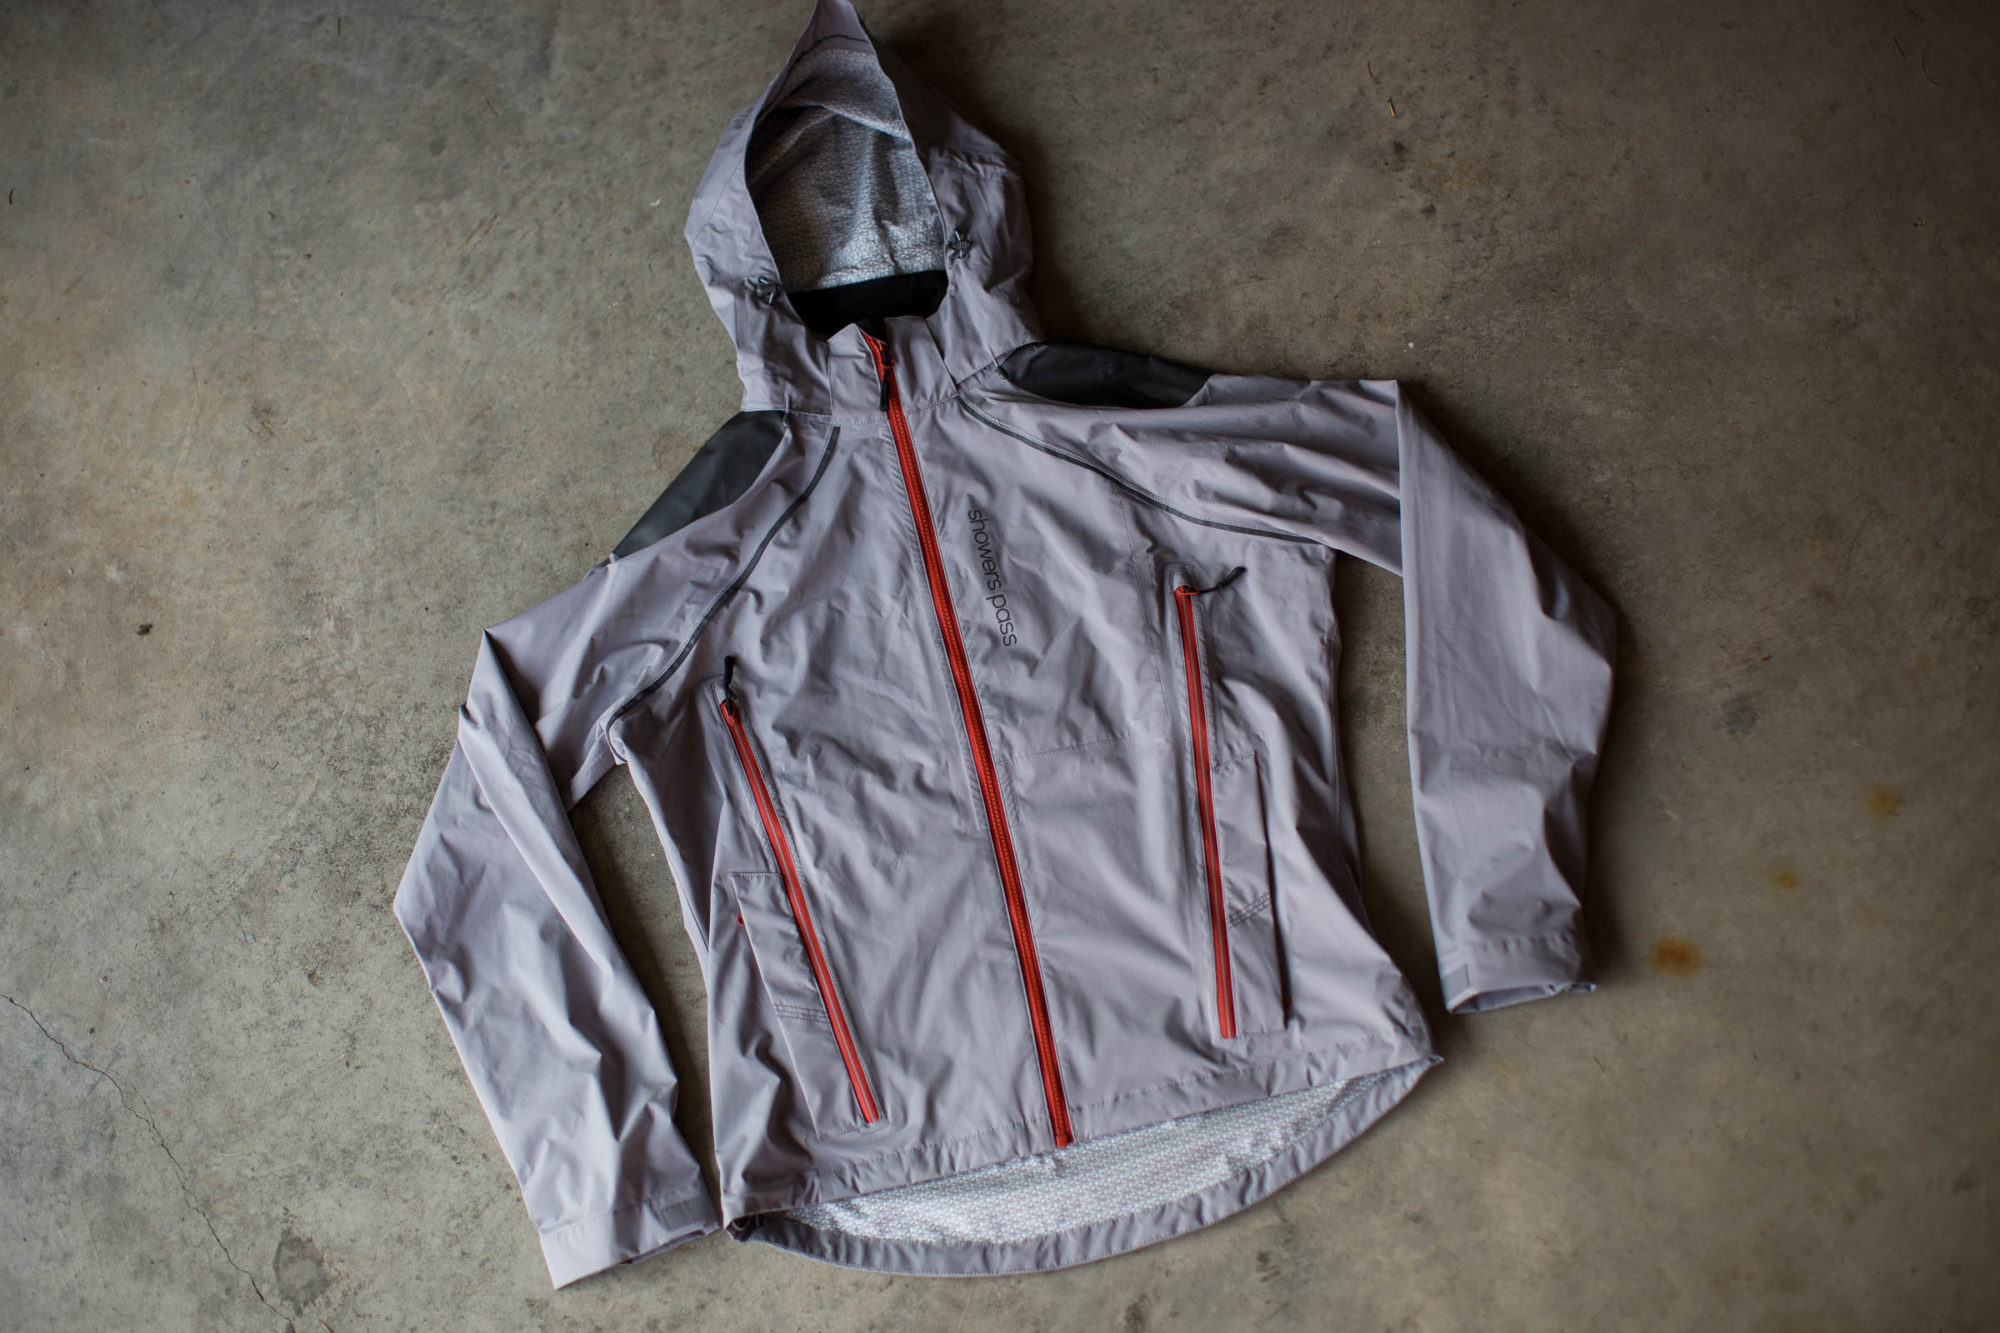 Showers Pass Elements Jacket Review